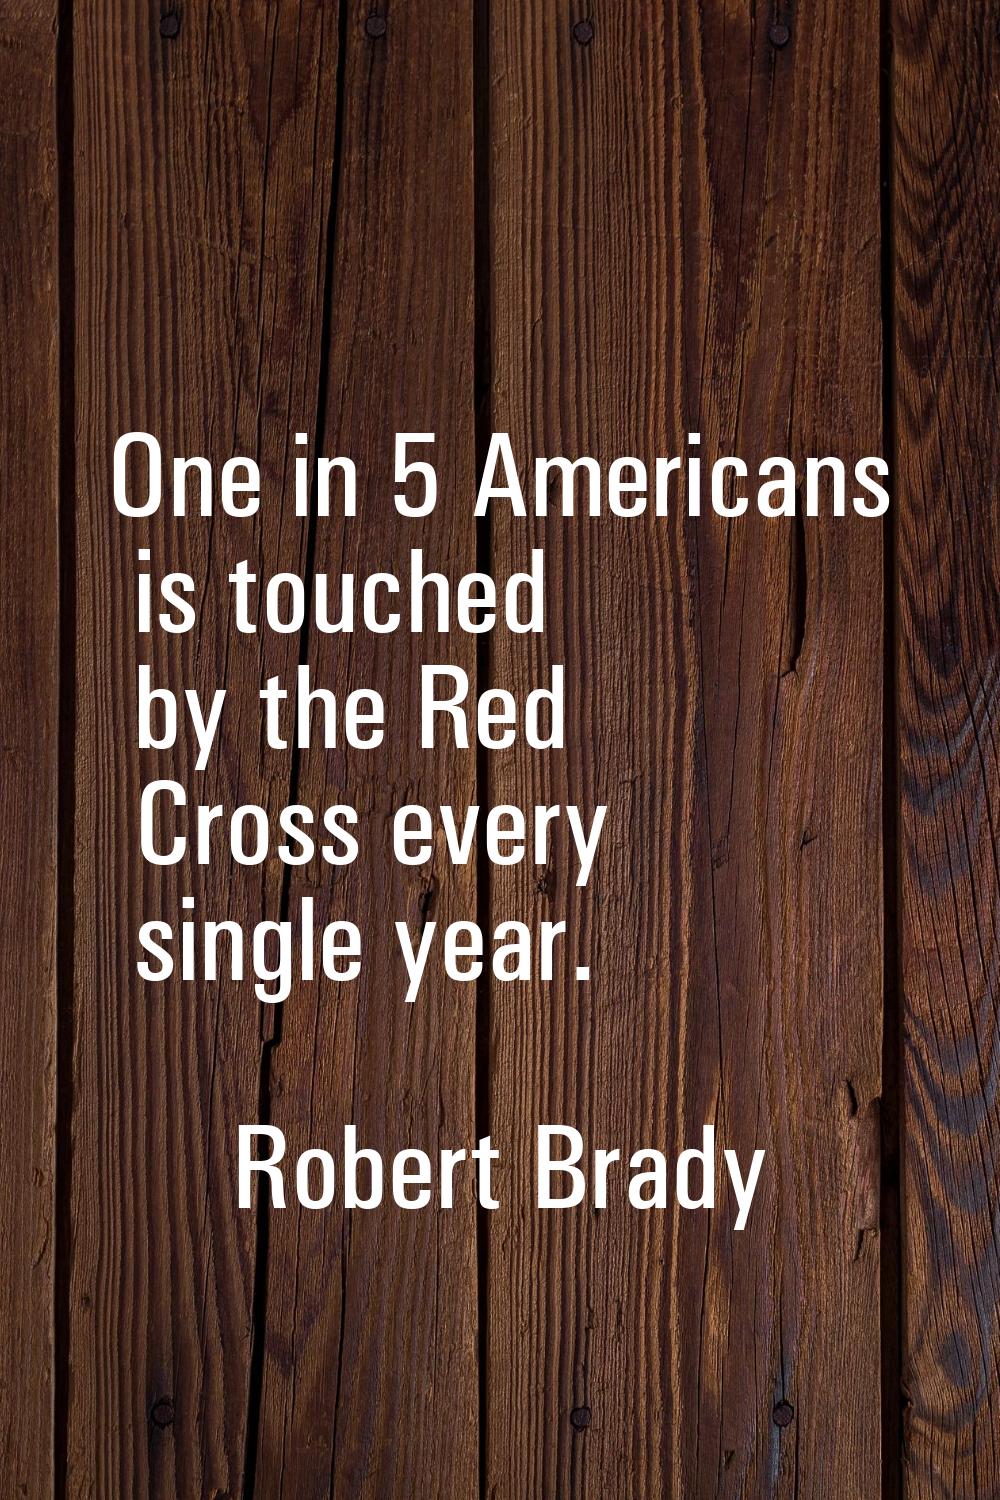 One in 5 Americans is touched by the Red Cross every single year.